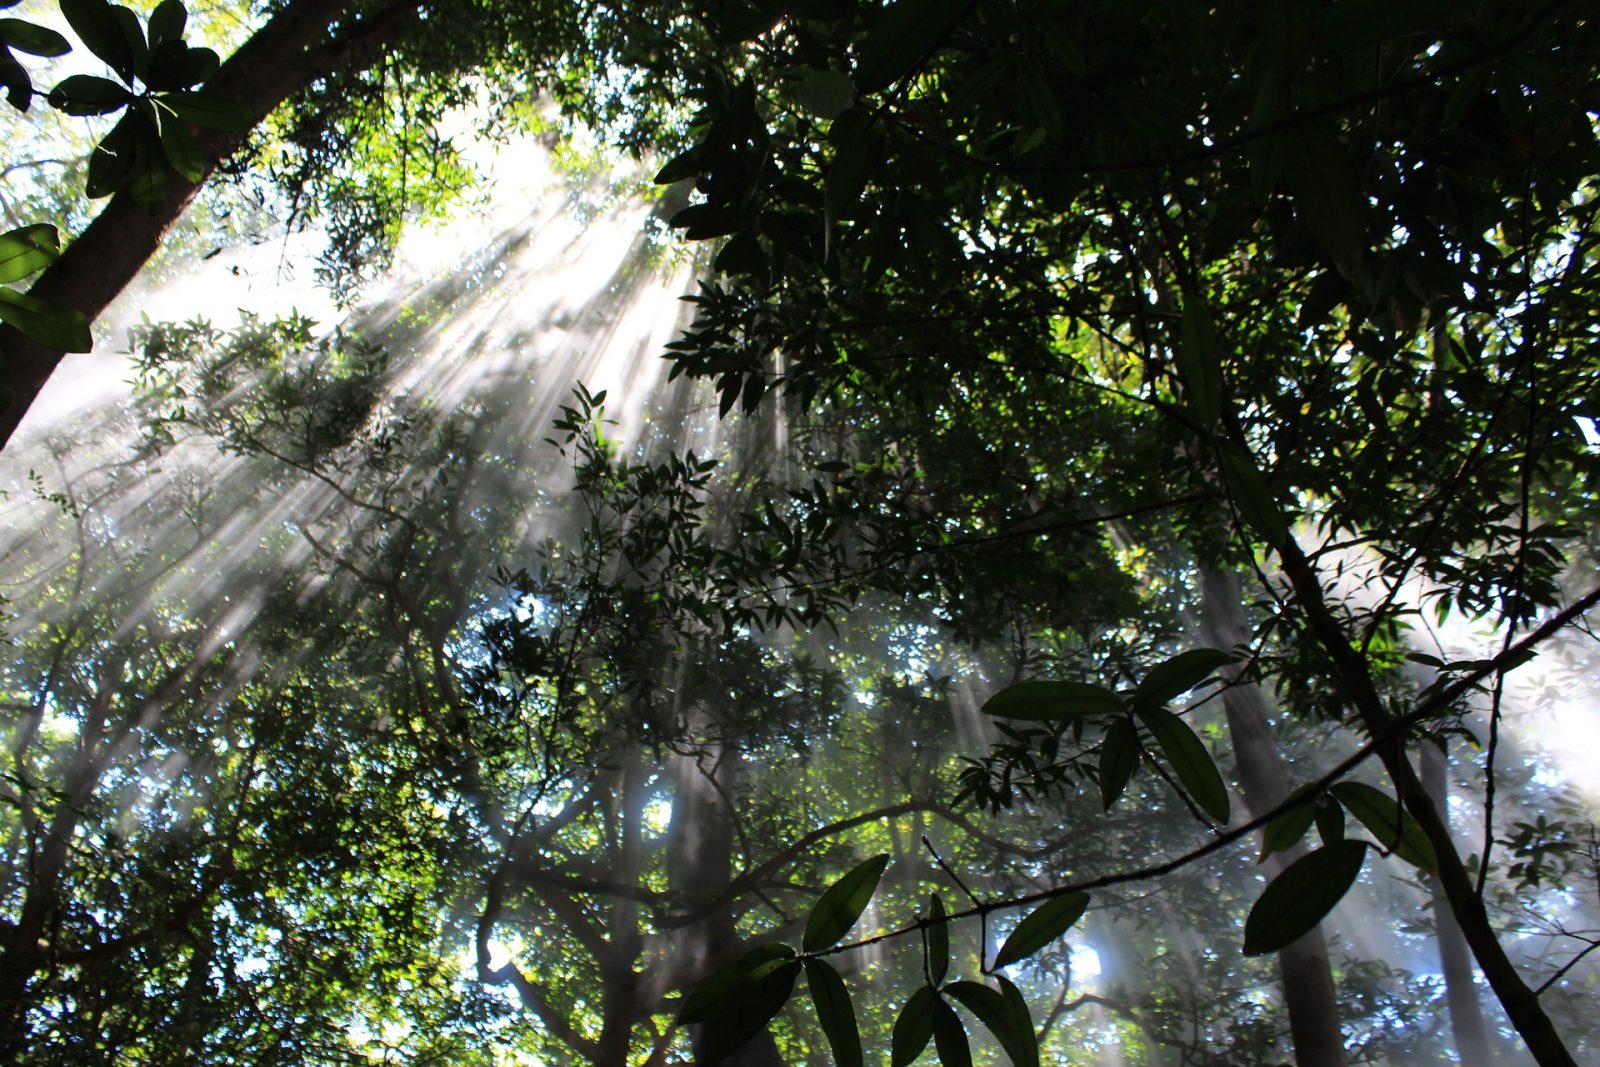 Monteverde Cloud Forest: Sun peaking through the trees in the cloud forest